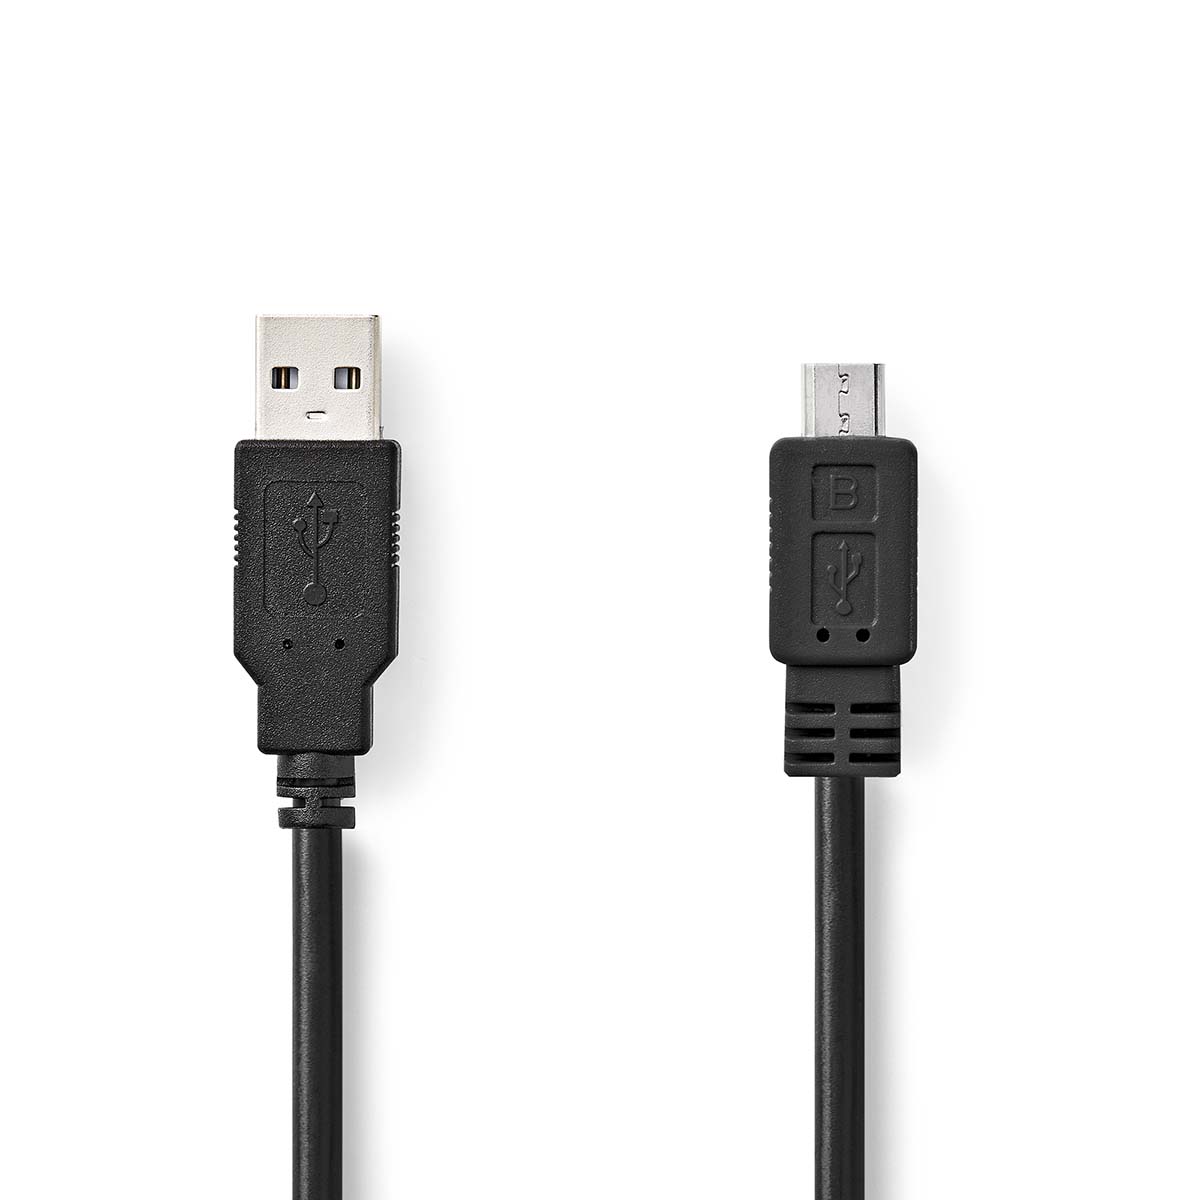 USB Cable | USB 2.0 | USB-A Male | USB Micro-B Male | 480 Mbps | Nickel .